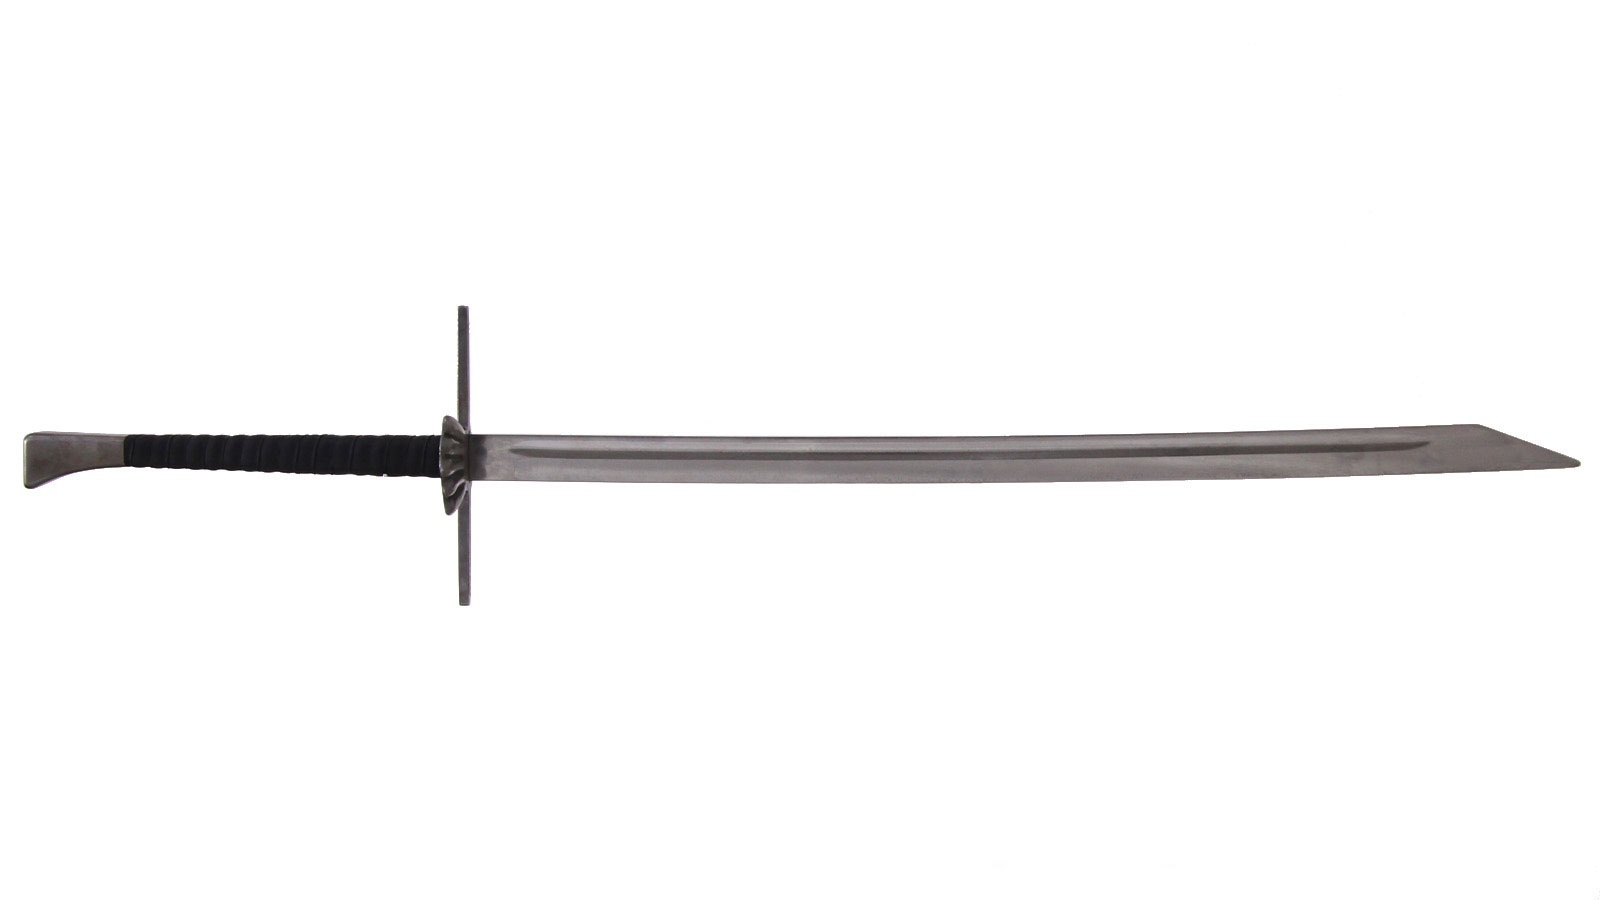 Two-handed Falchion Sword